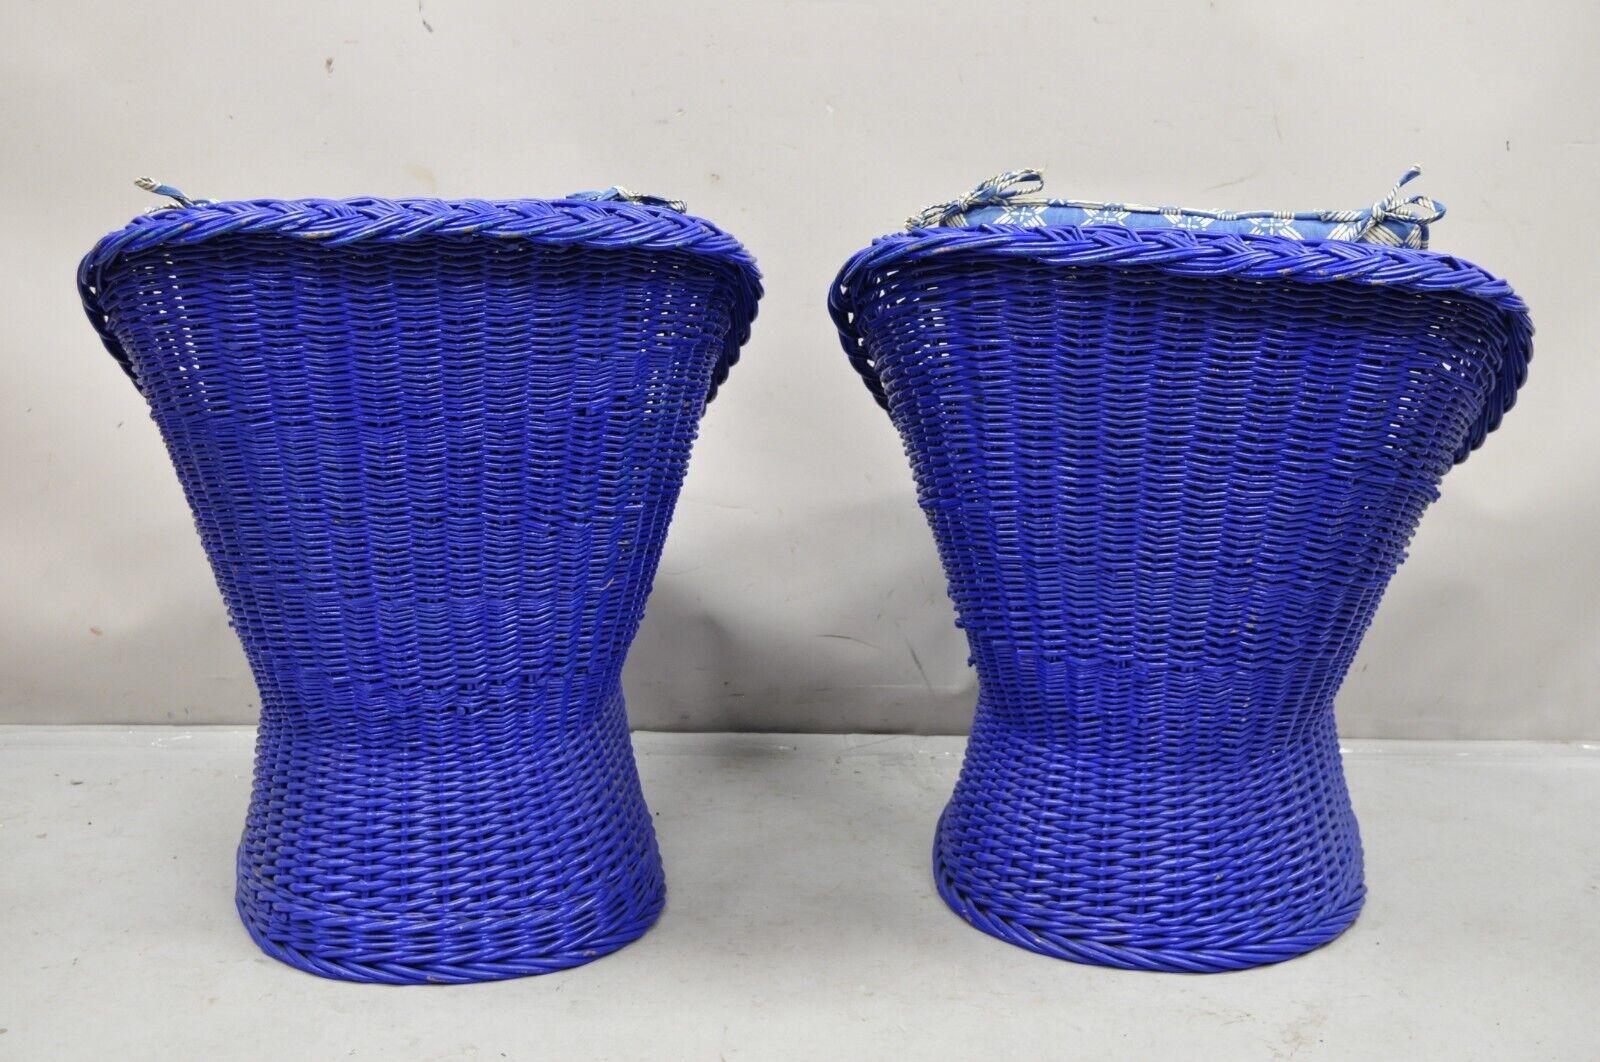 Vintage Mid Century Modern Blue Painted Wicker Rattan Pod Club Chairs - a Pair For Sale 5